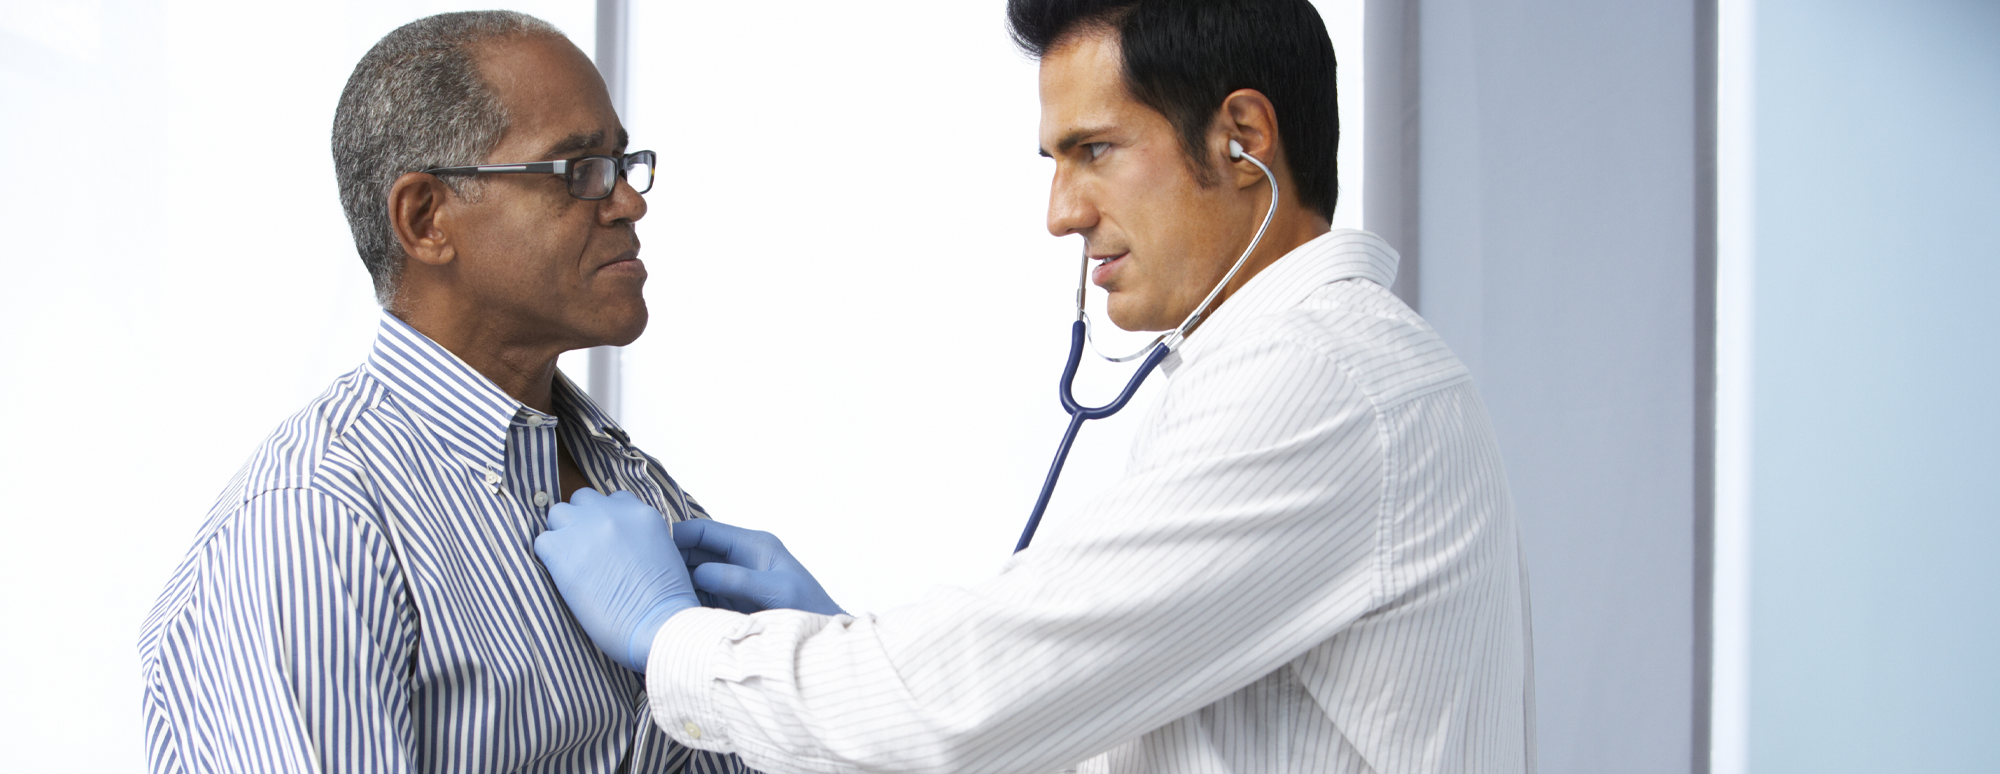 doctor checking heartbeat